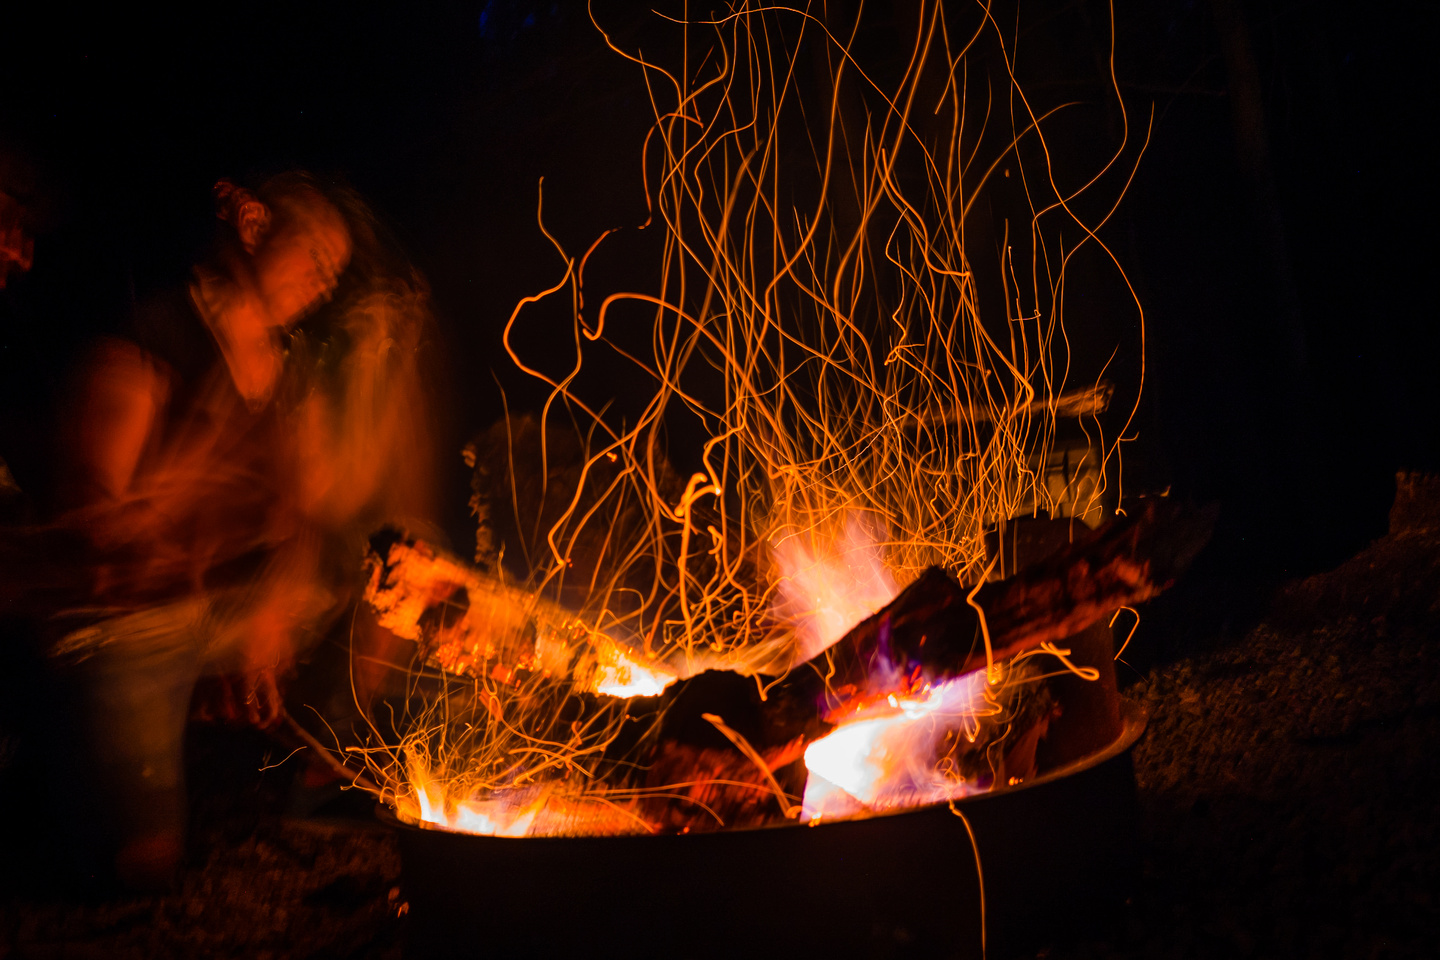 How to Build a Campfire and Campfire Safety Tips